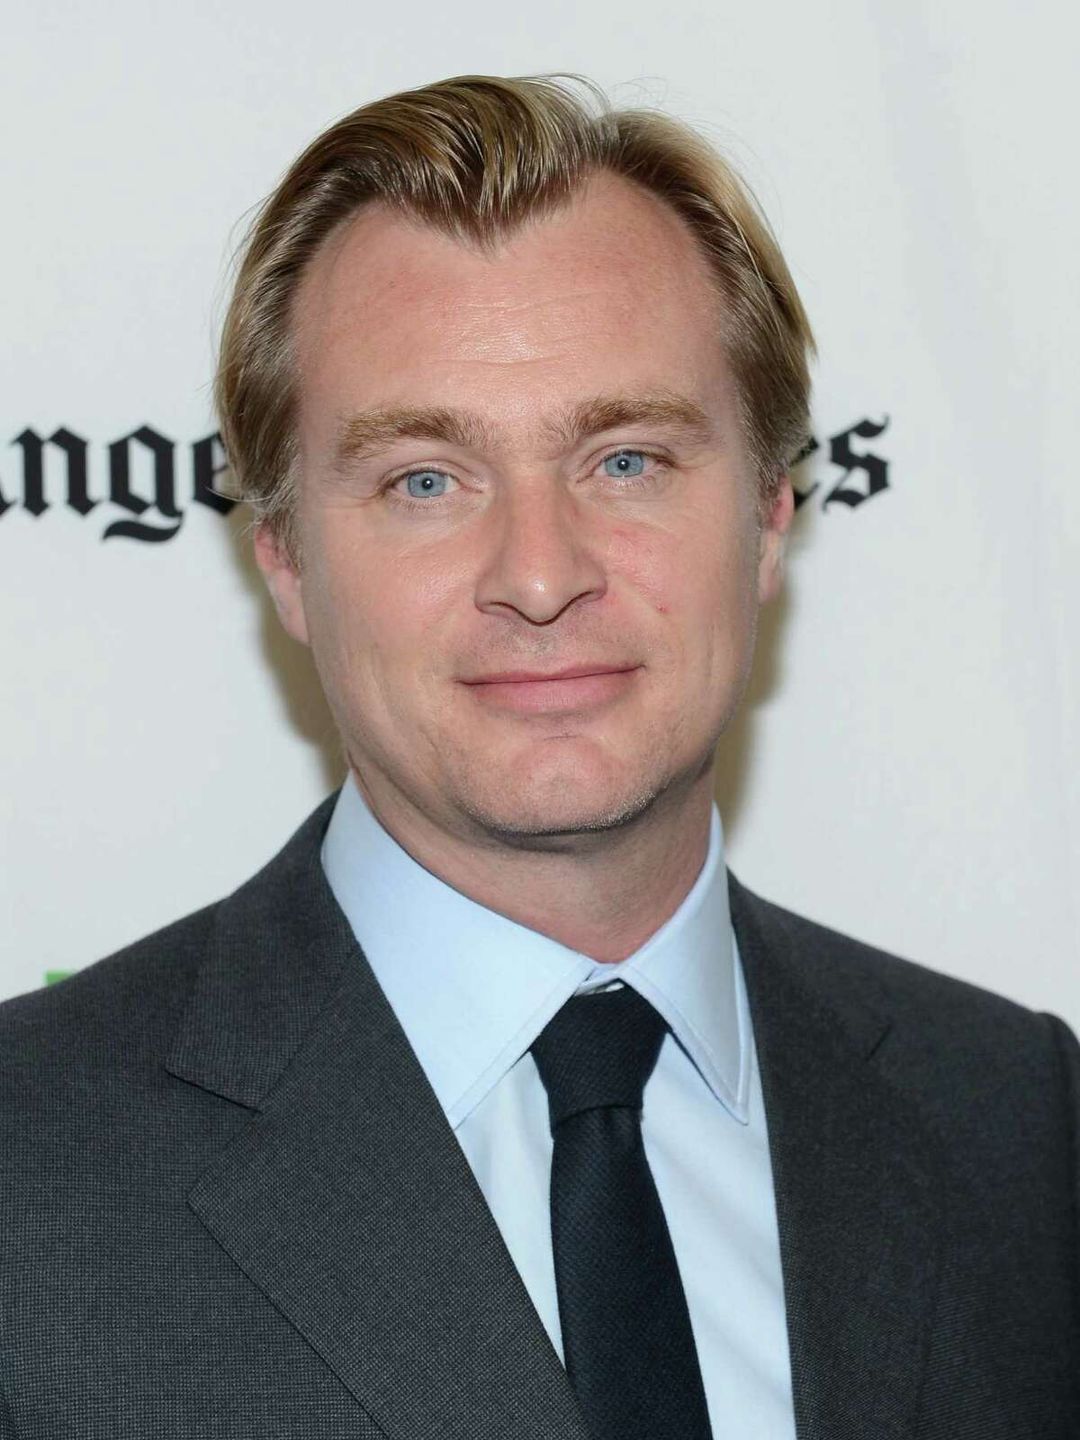 Christopher Nolan does he have kids